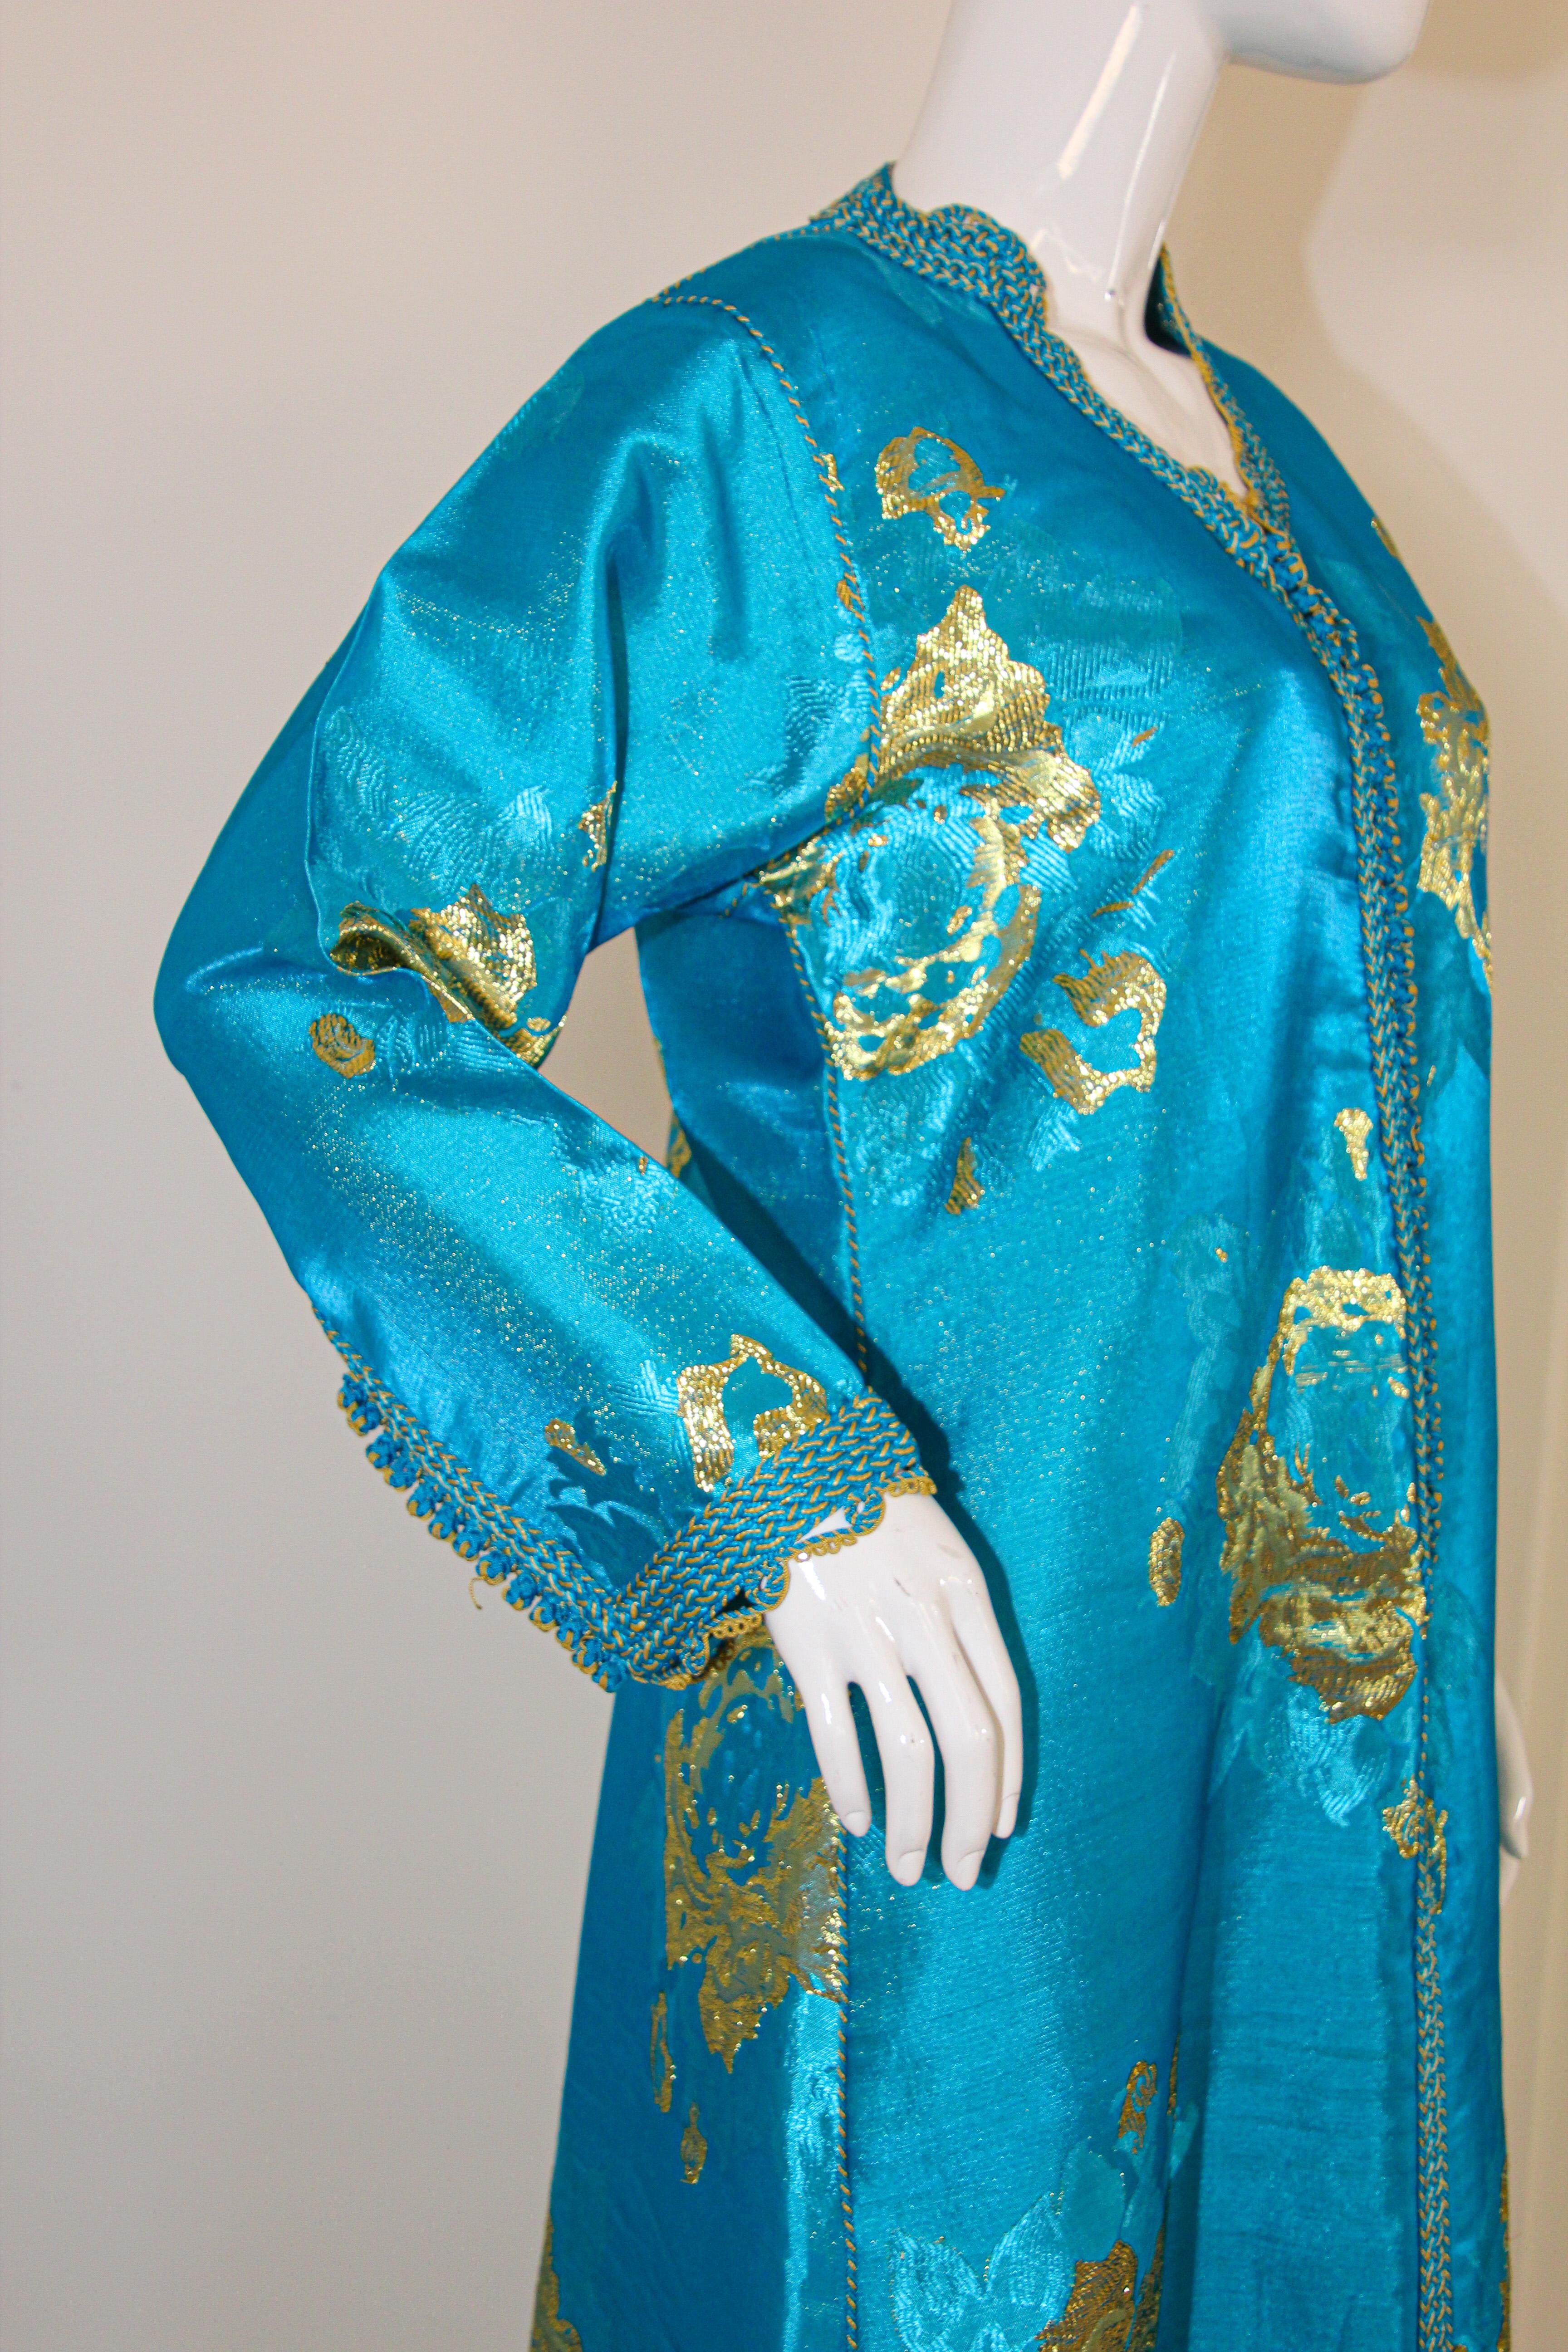 Moroccan Vintage Kaftan in Turquoise and Gold Floral Brocade Metallic Lame 7